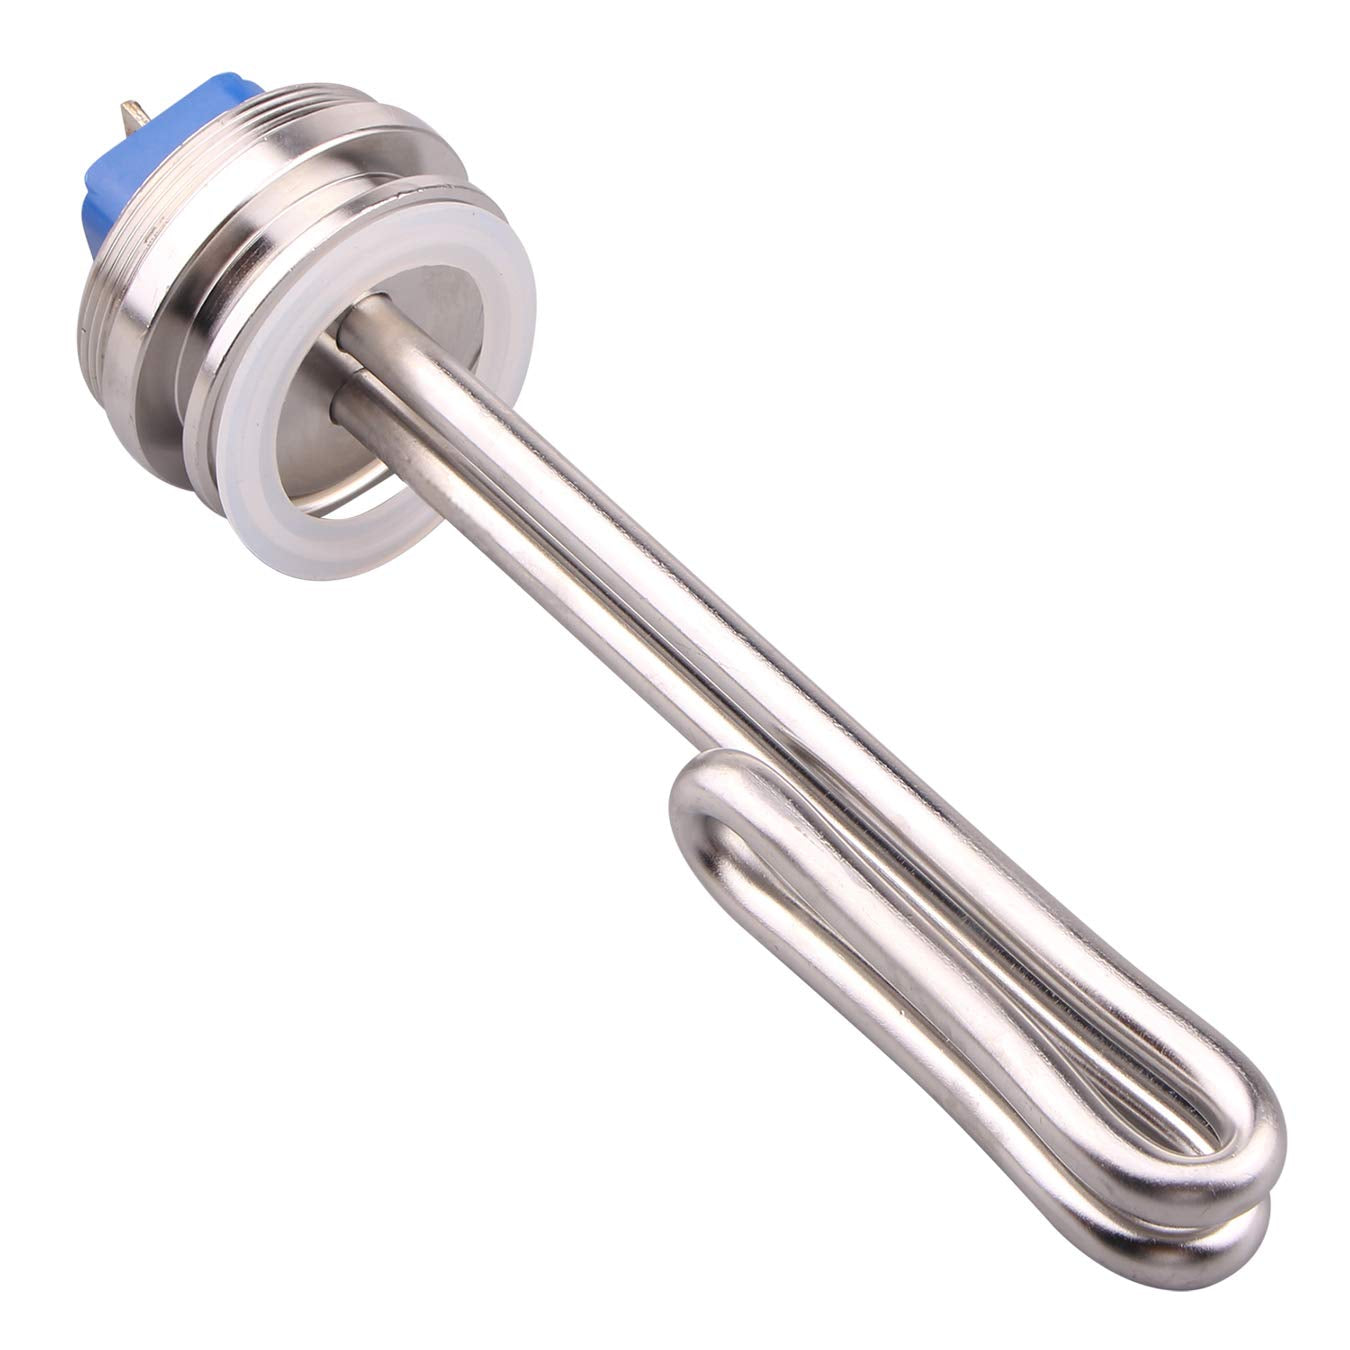 1.5" Inch (Od50.5Mm) Tri-Clamp Foldback Heating Element Stainless Steel Immersion Water Heater (120V 1500W)